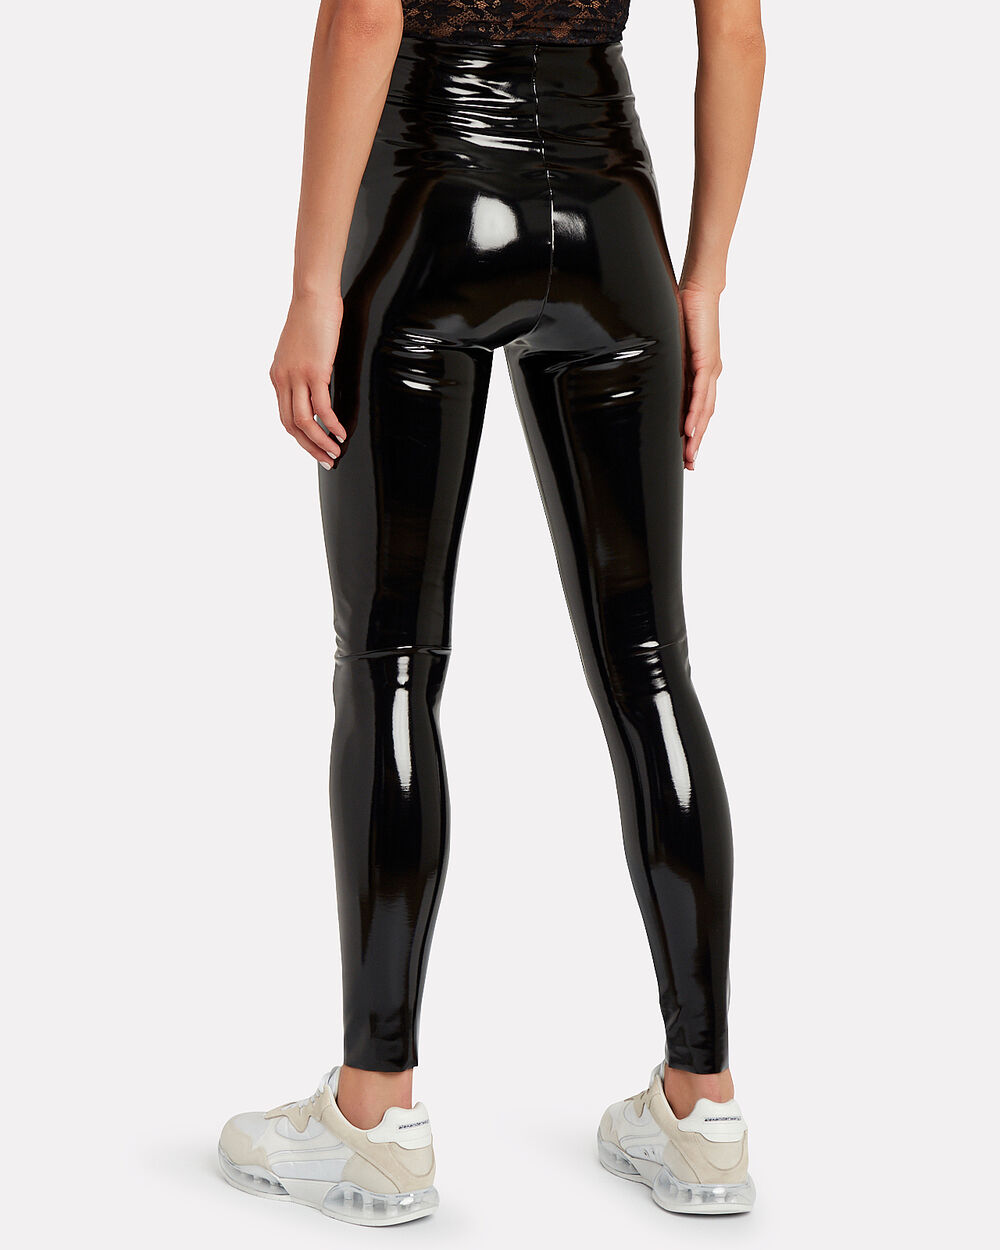 COMMANDO FAUX PATENT LEATHER LEGGINGS WITH PERFECT CONTROL